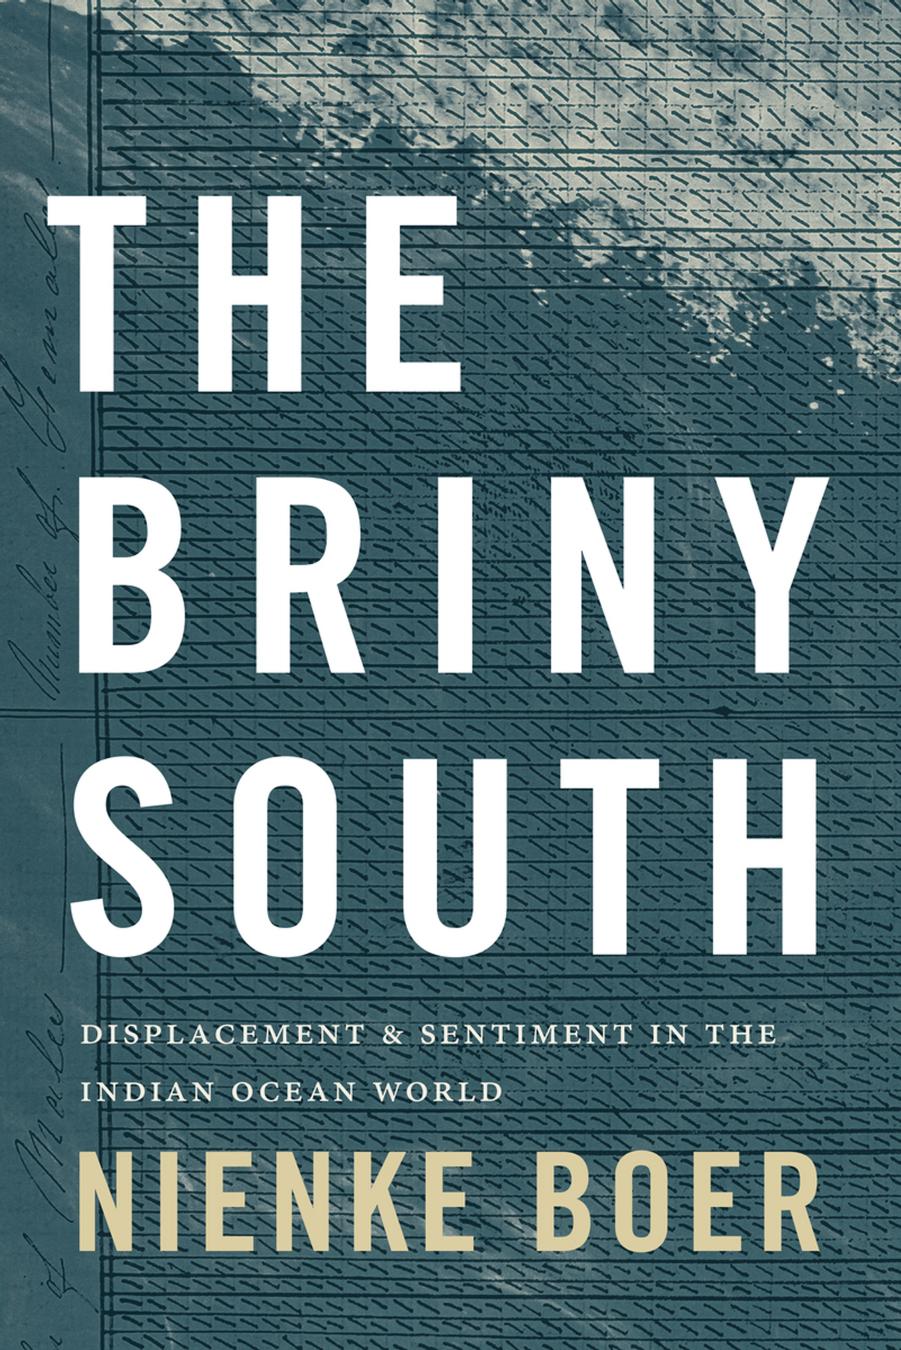 The Briny South: Displacement and Sentiment in the Indian Ocean World by Nienke Boer